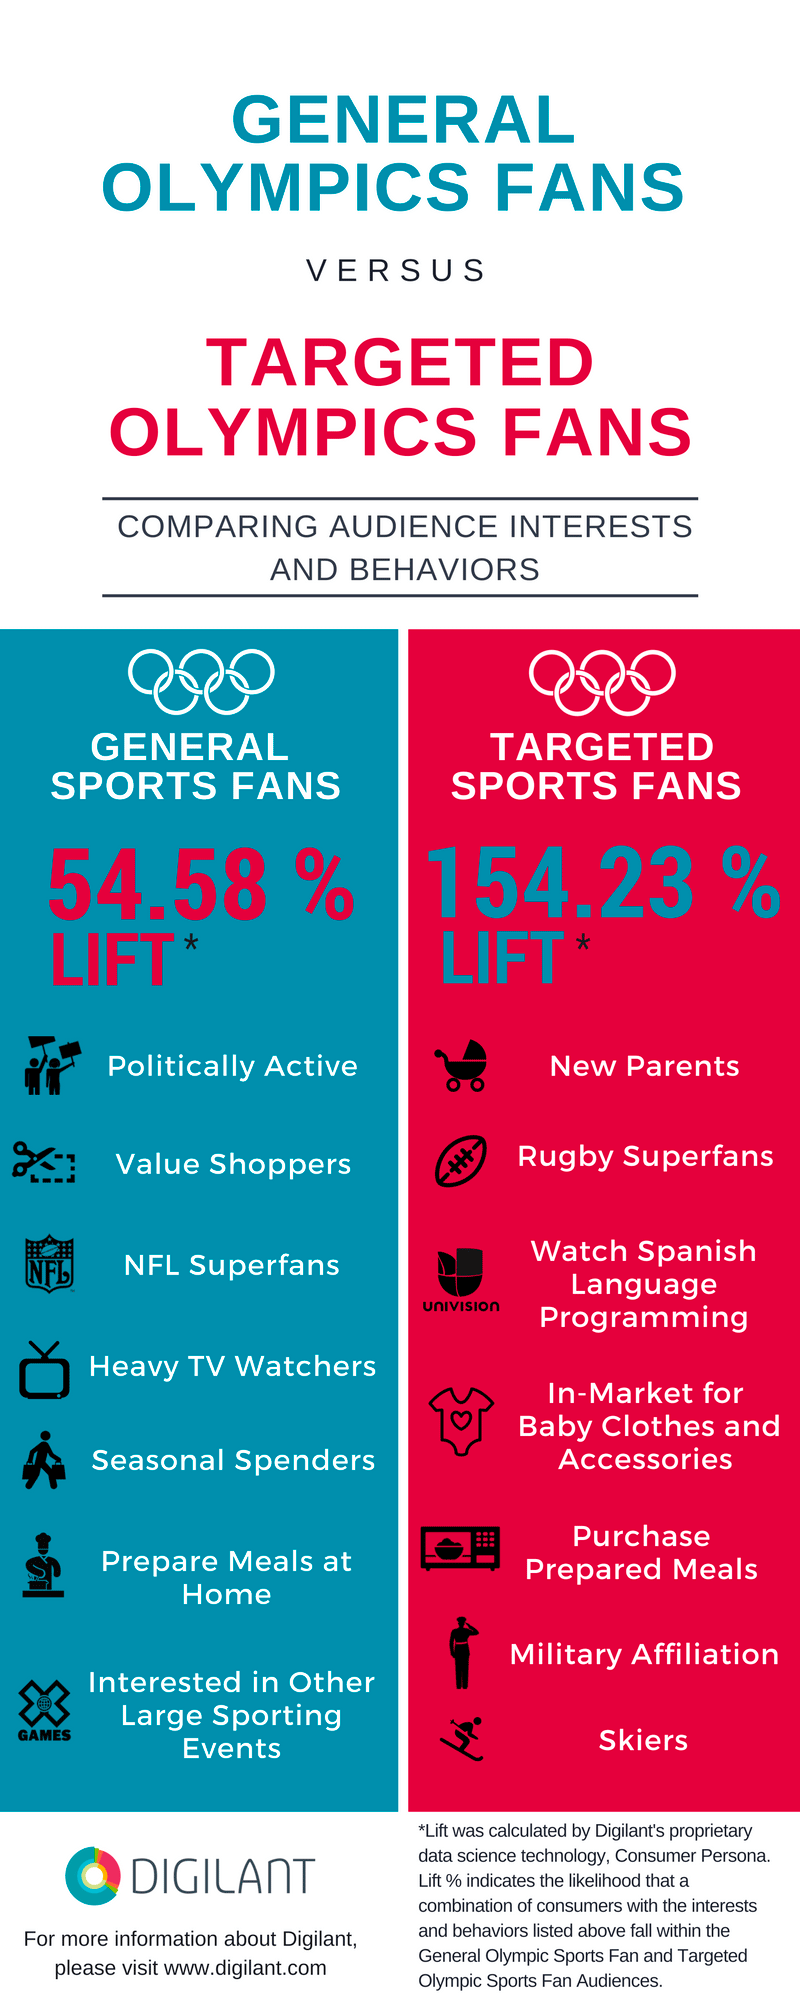 Press Release: What the Rio Olympics Can Teach US Marketers about Targeting Sports Fans